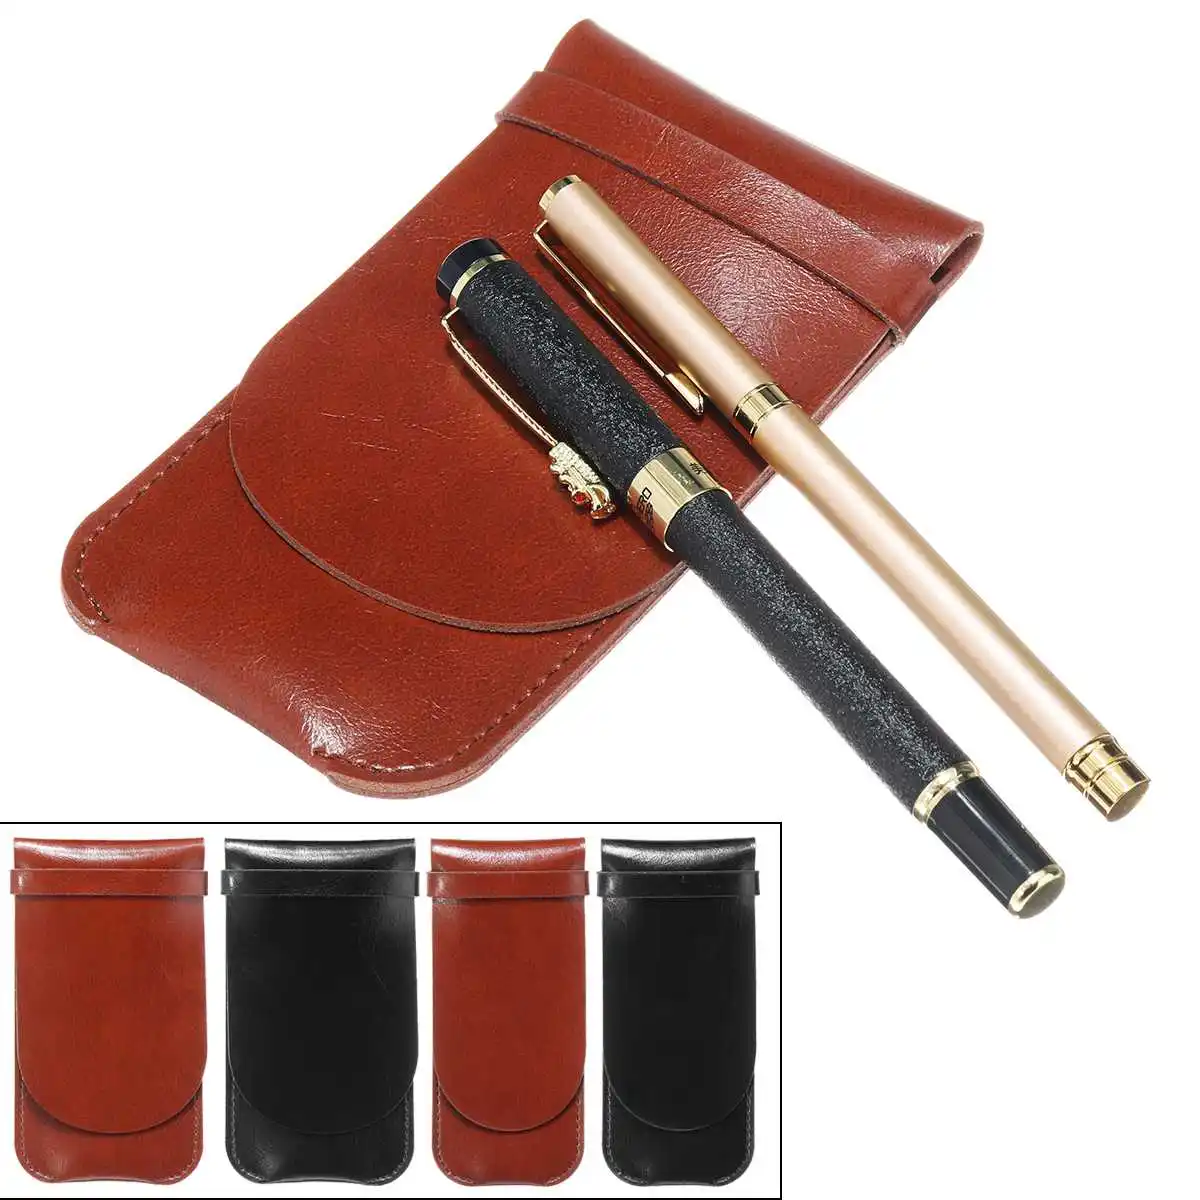 

2/4/5 Pens Case Luxury Brown /Blcack Leather Pencil Case/Bag For Roller Ball Pen / Fountain Pen /Ballpoint Pen Binder Stationery